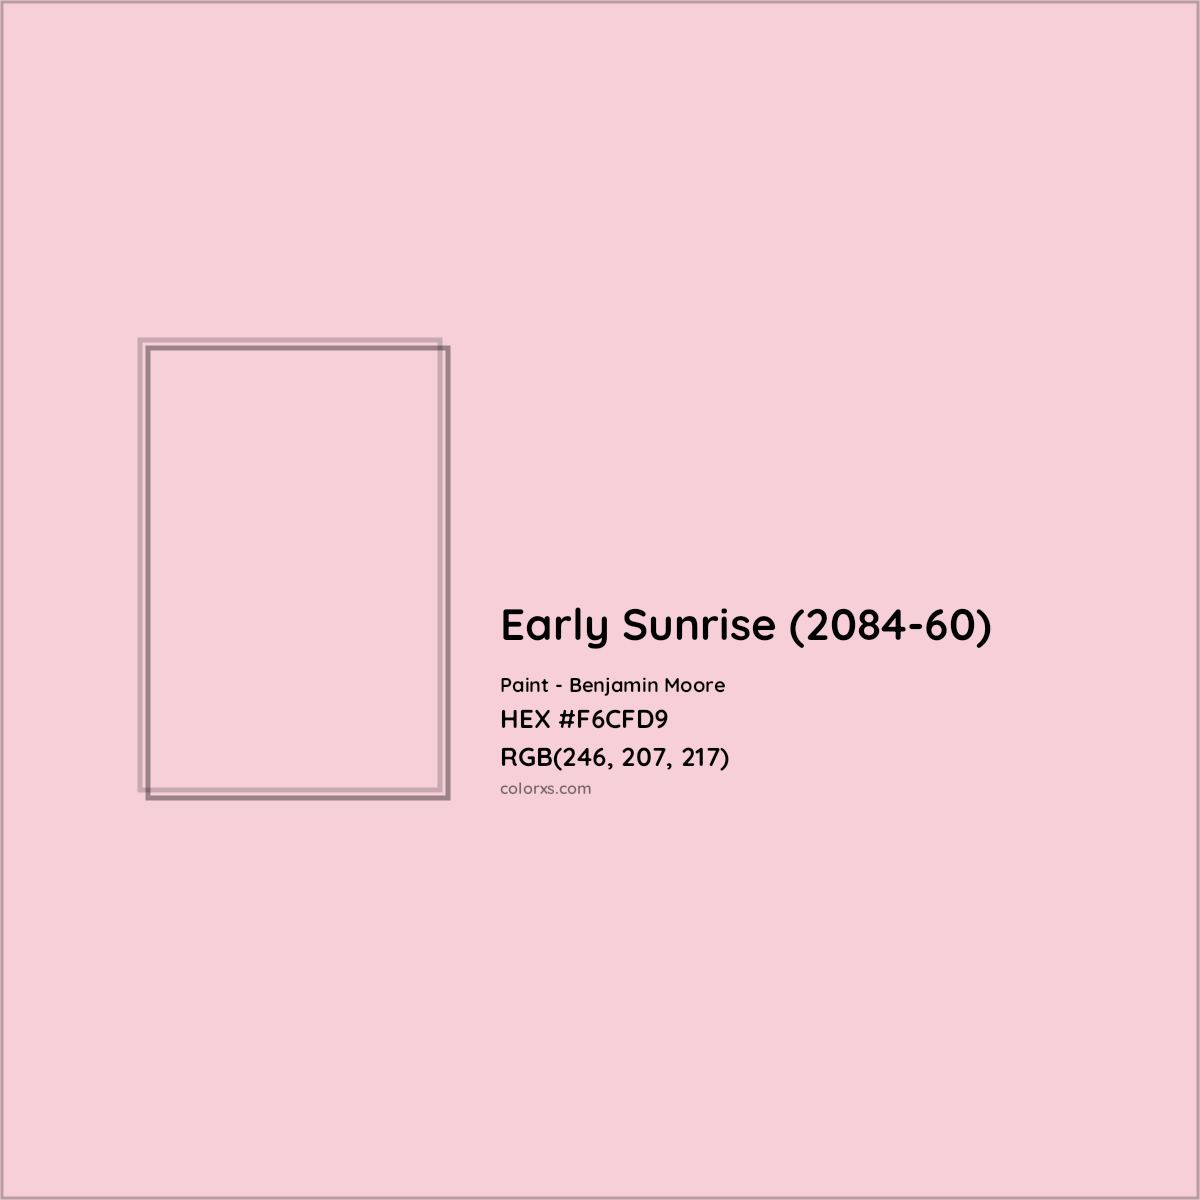 HEX #F6CFD9 Early Sunrise (2084-60) Paint Benjamin Moore - Color Code